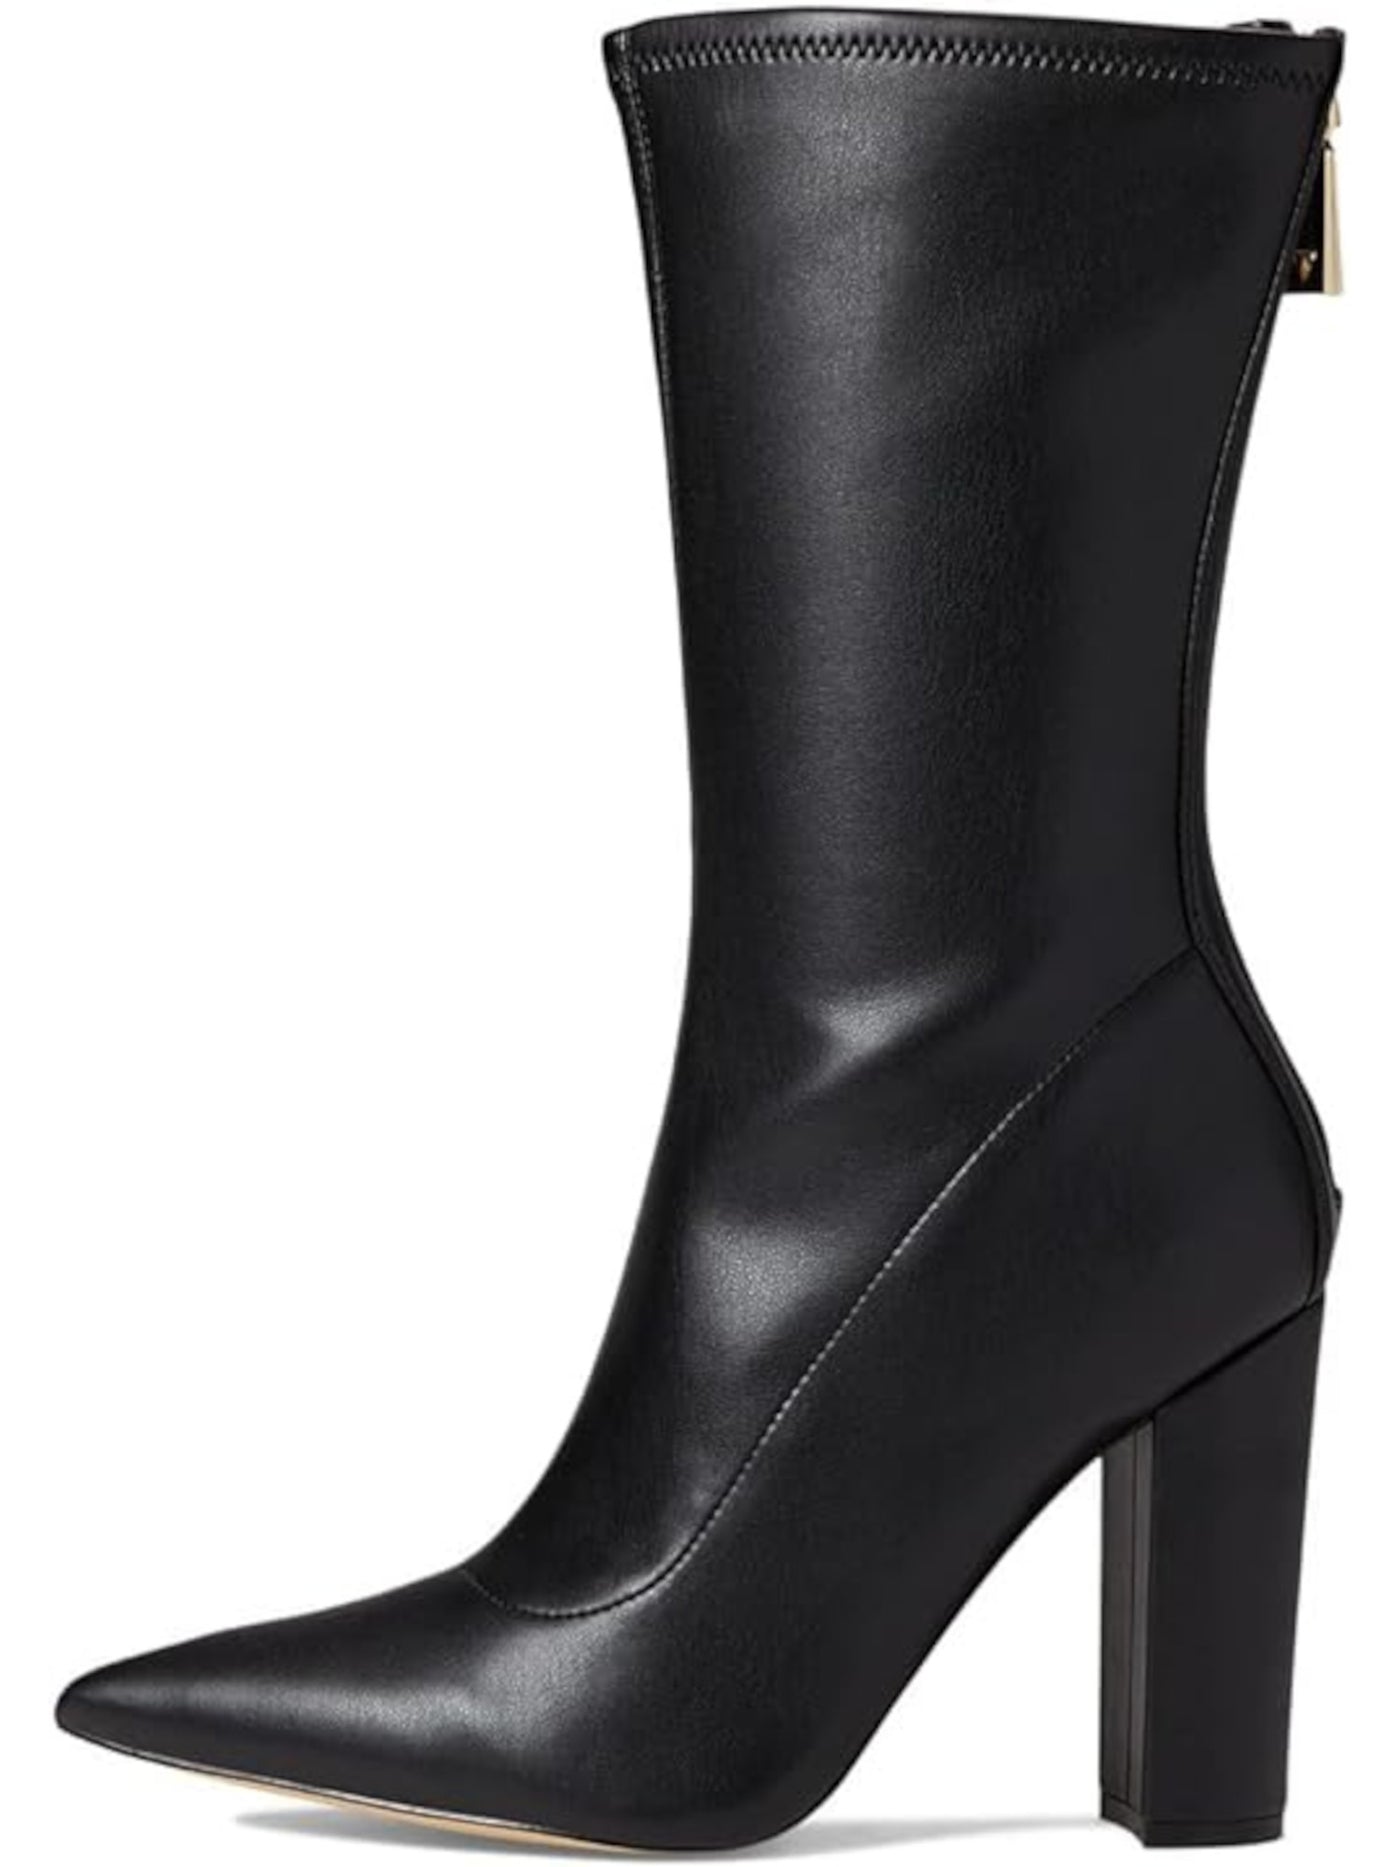 GUESS Womens Black Abbale Pointy Toe Block Heel Zip-Up Dress Boots 5 M